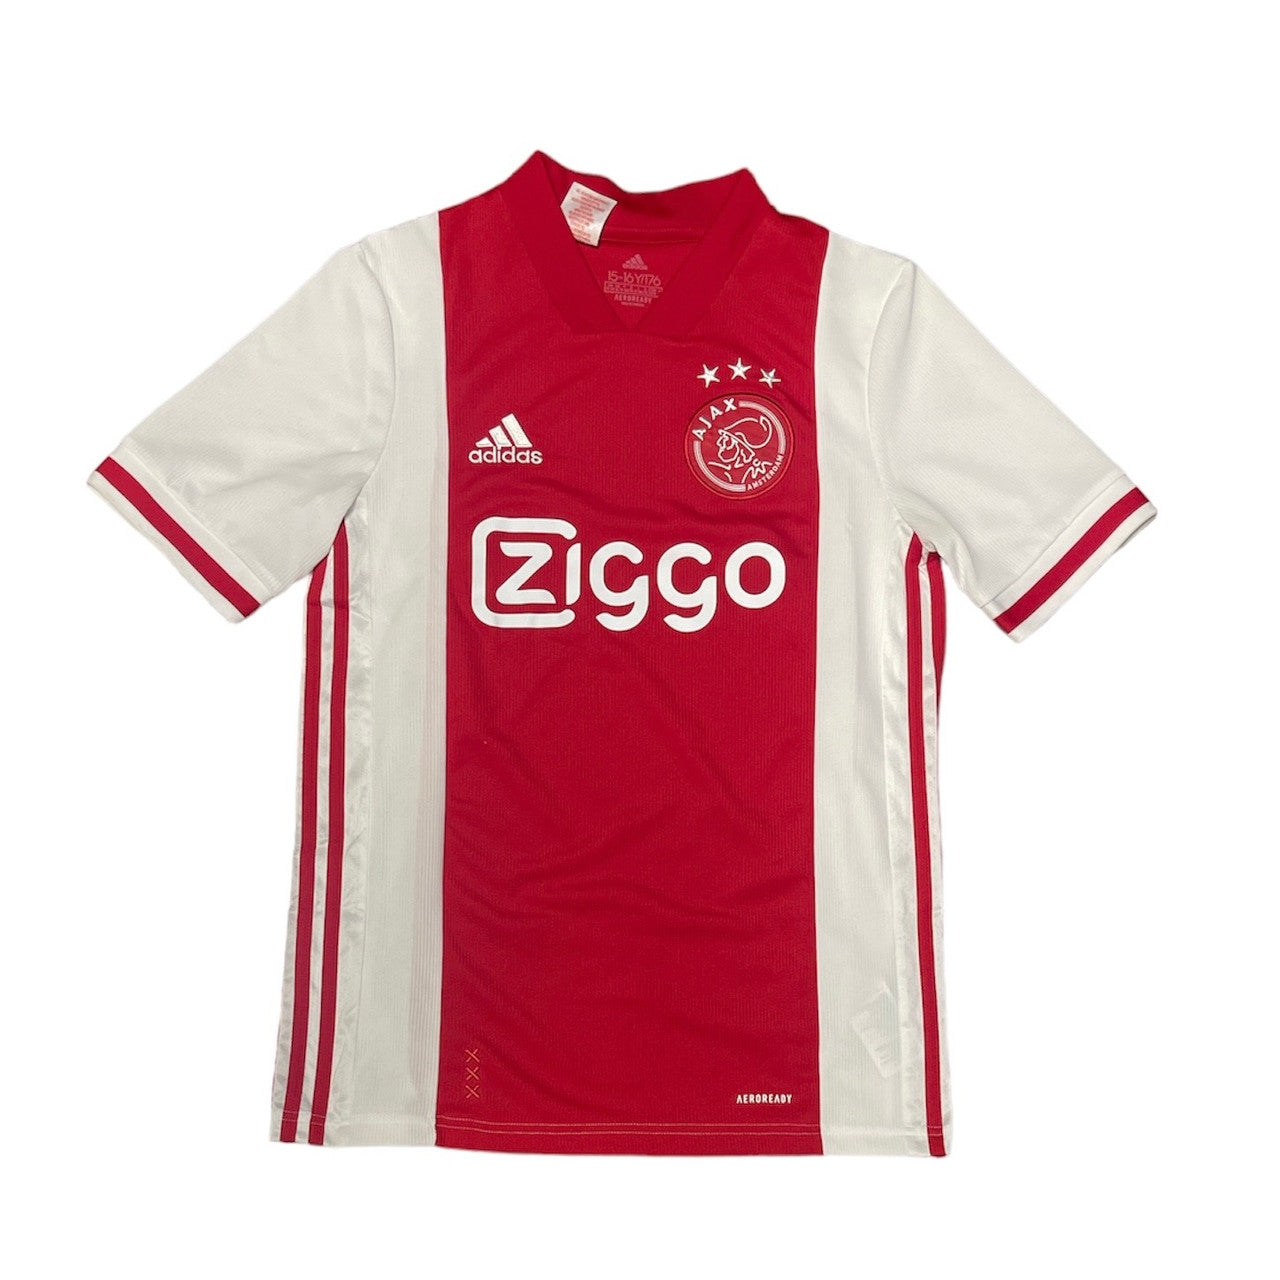 Adidas Ajax 2020/21 Home Jersey (Youth)